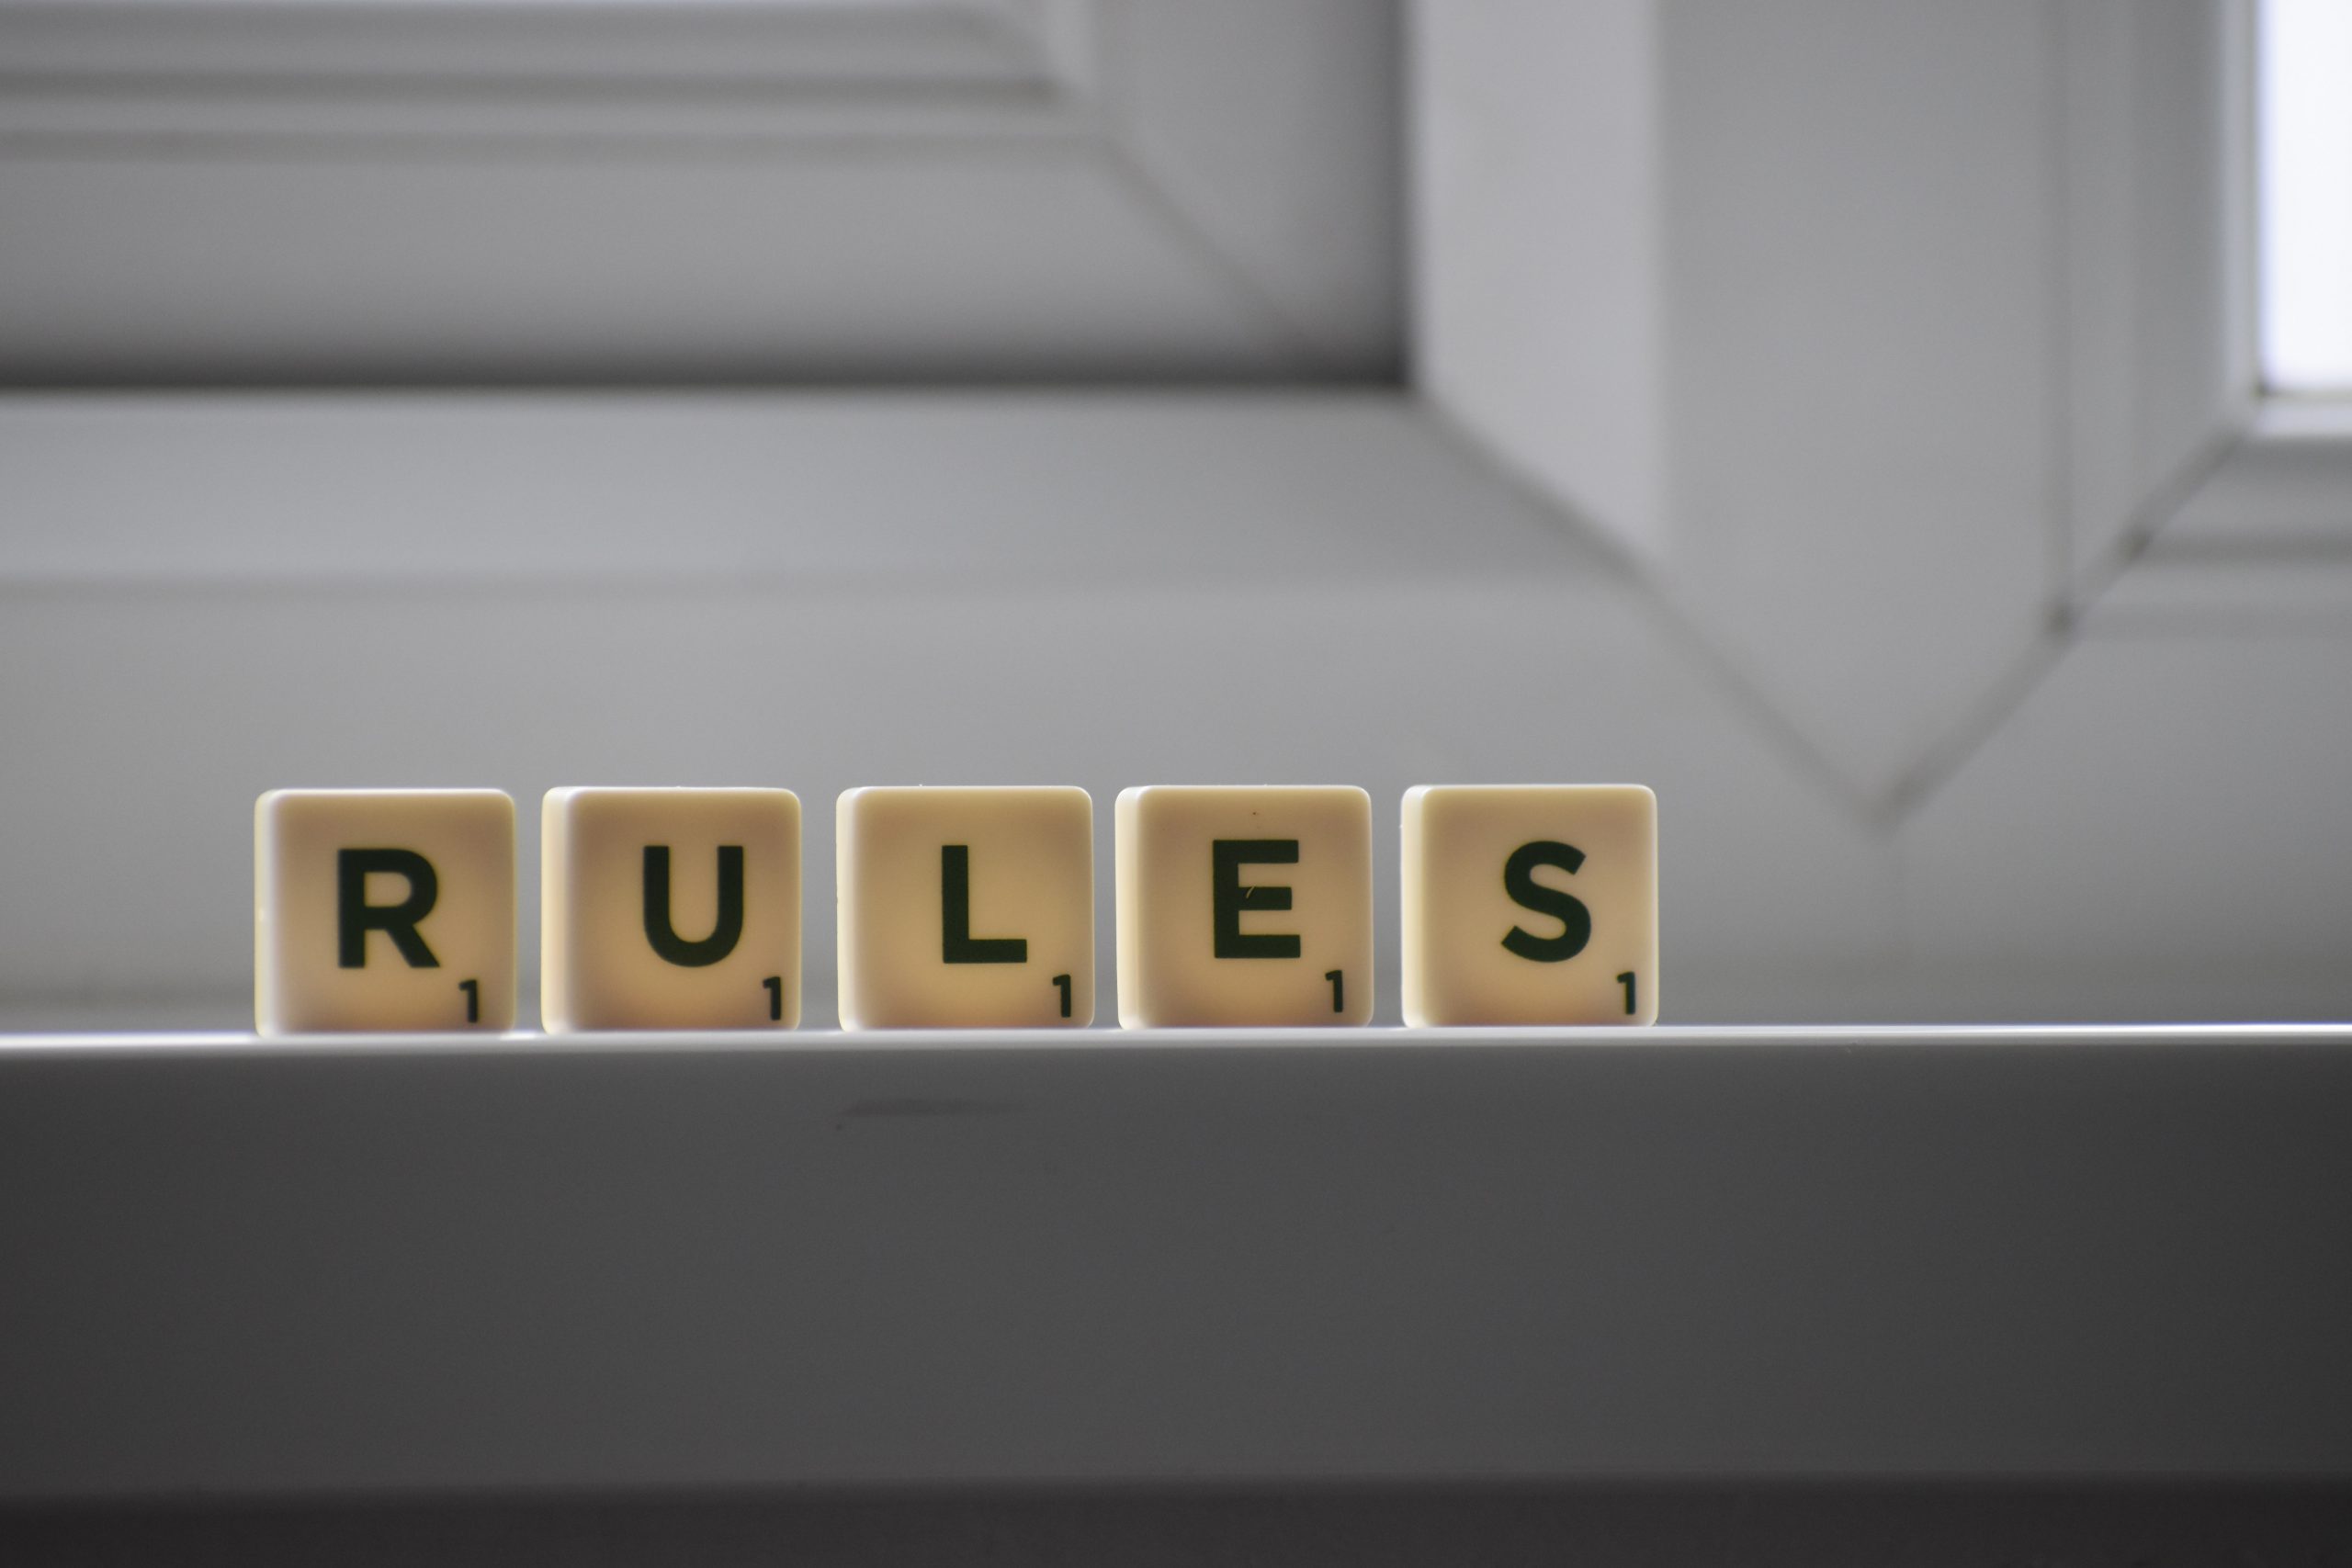 scrabble tiles depicting the word rules